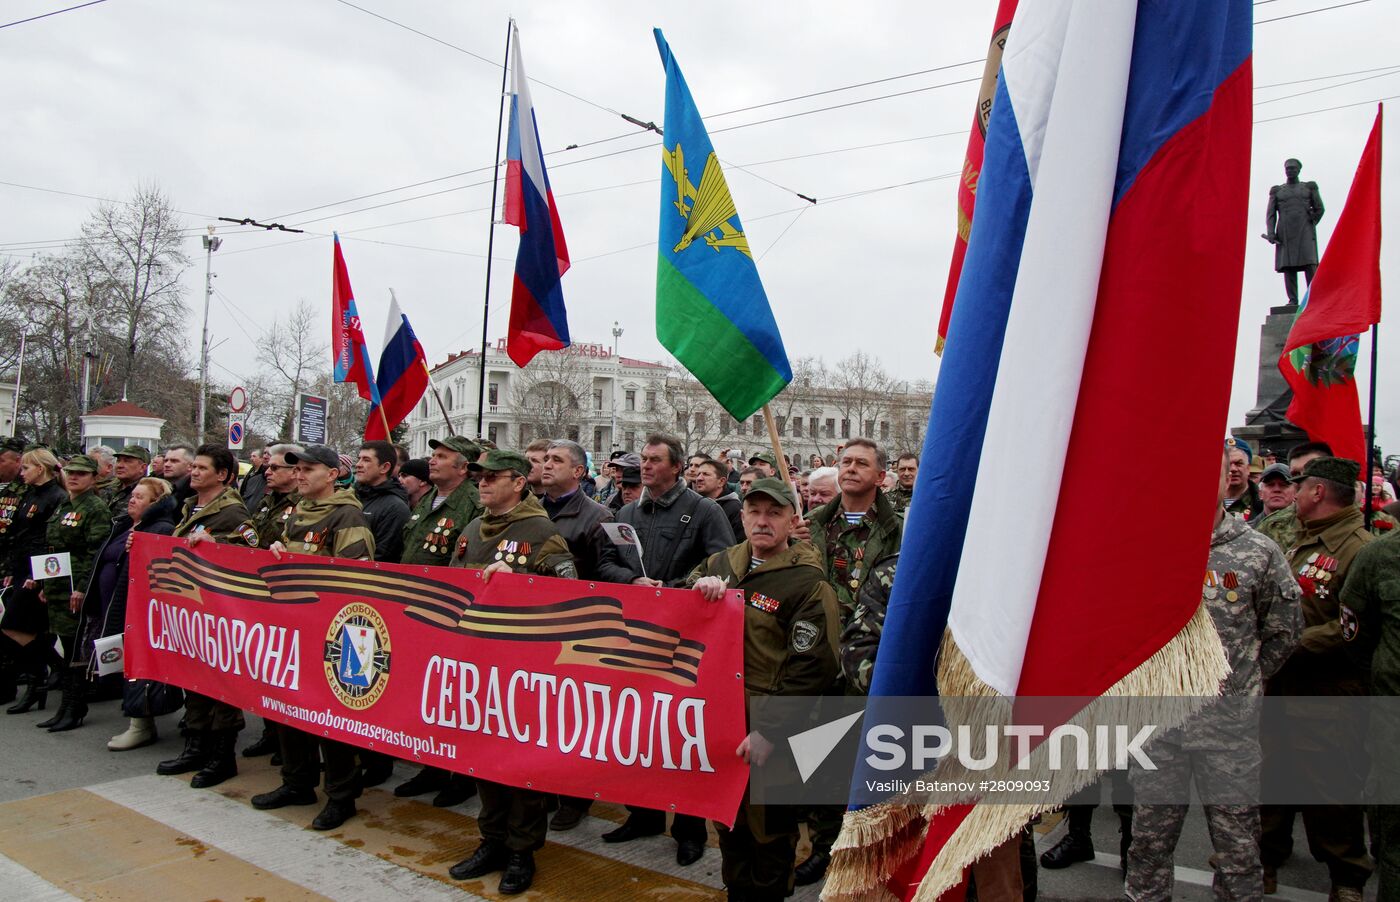 Celebration of the anniversary of Crimea reuniting with Russia